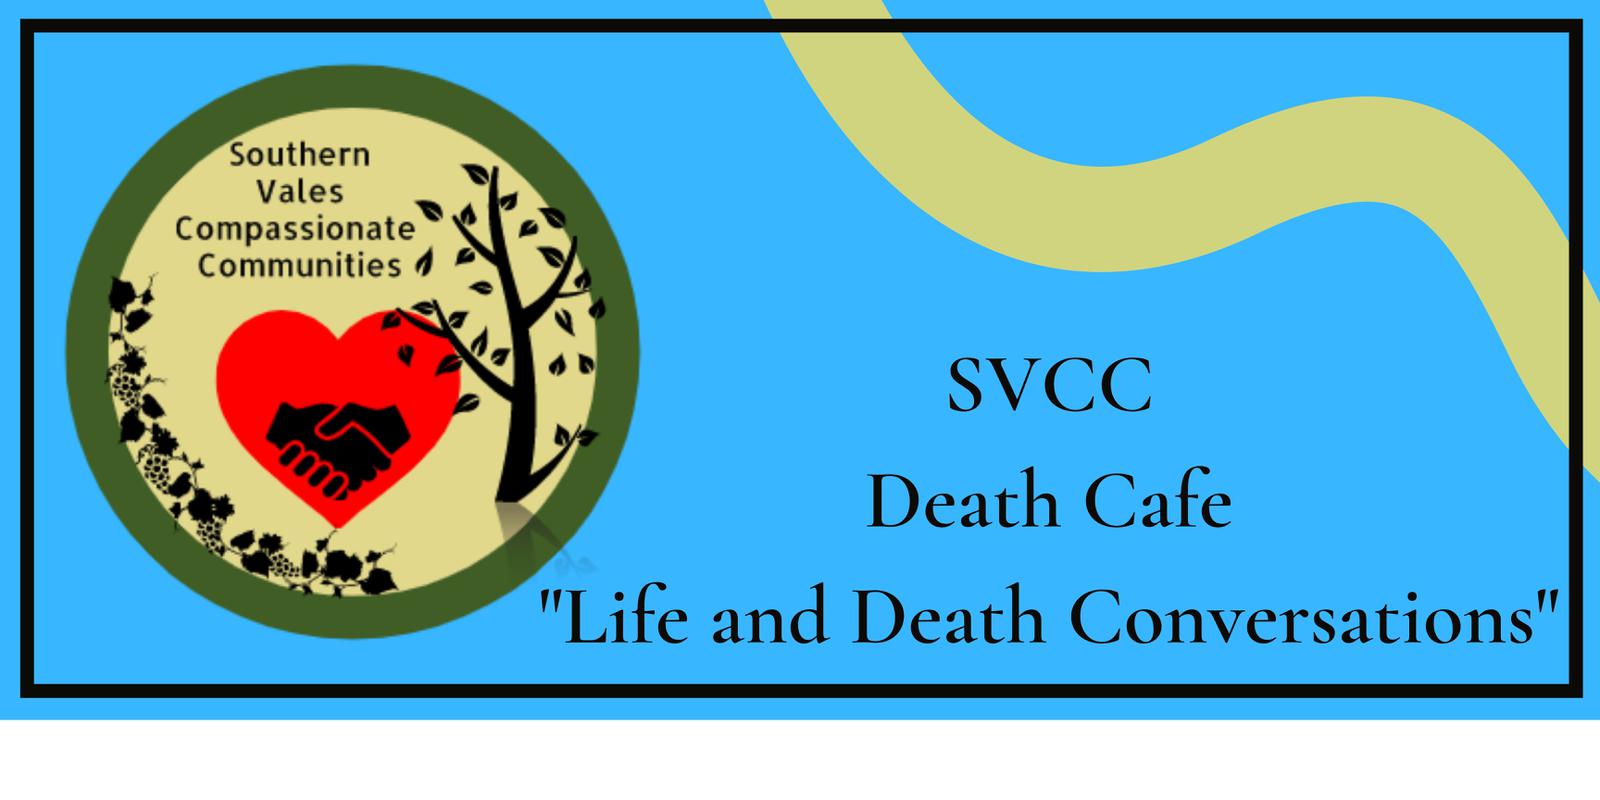 Death Cafe Southern Vales Compassionate Communities